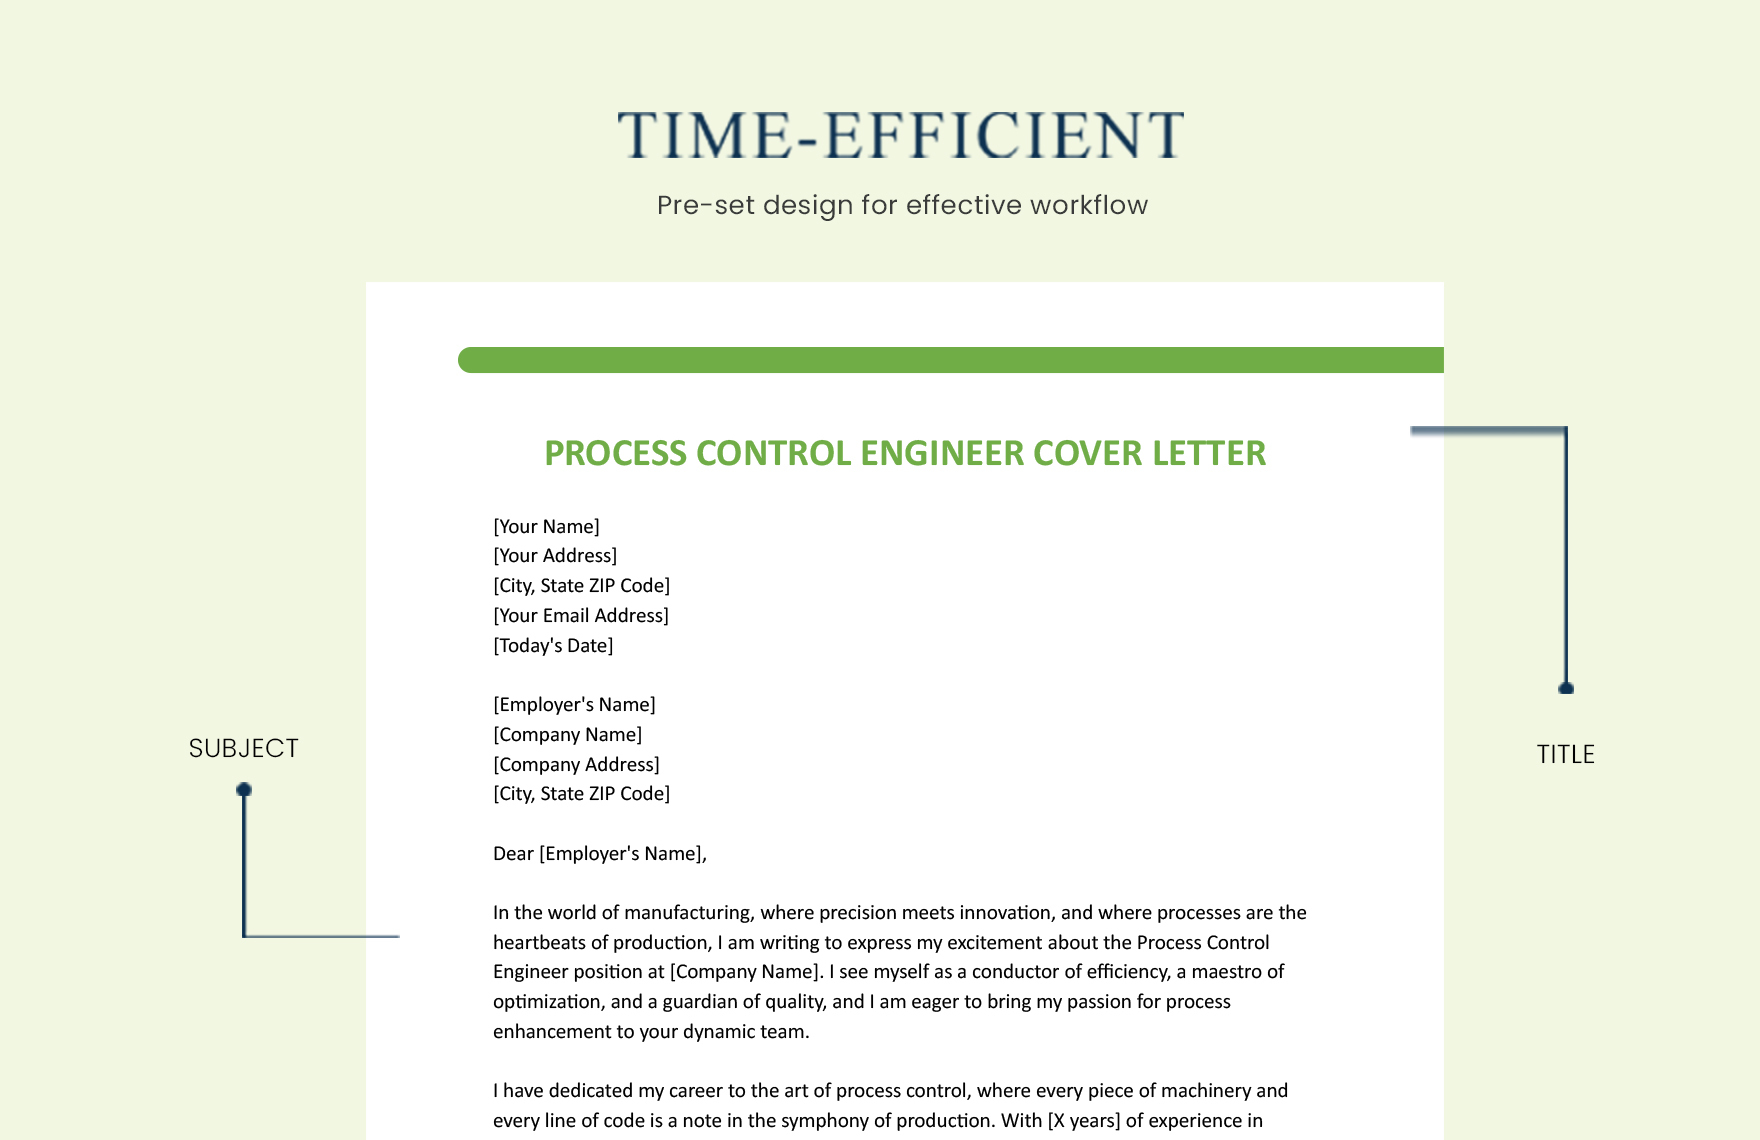 Process Control Engineer Cover Letter